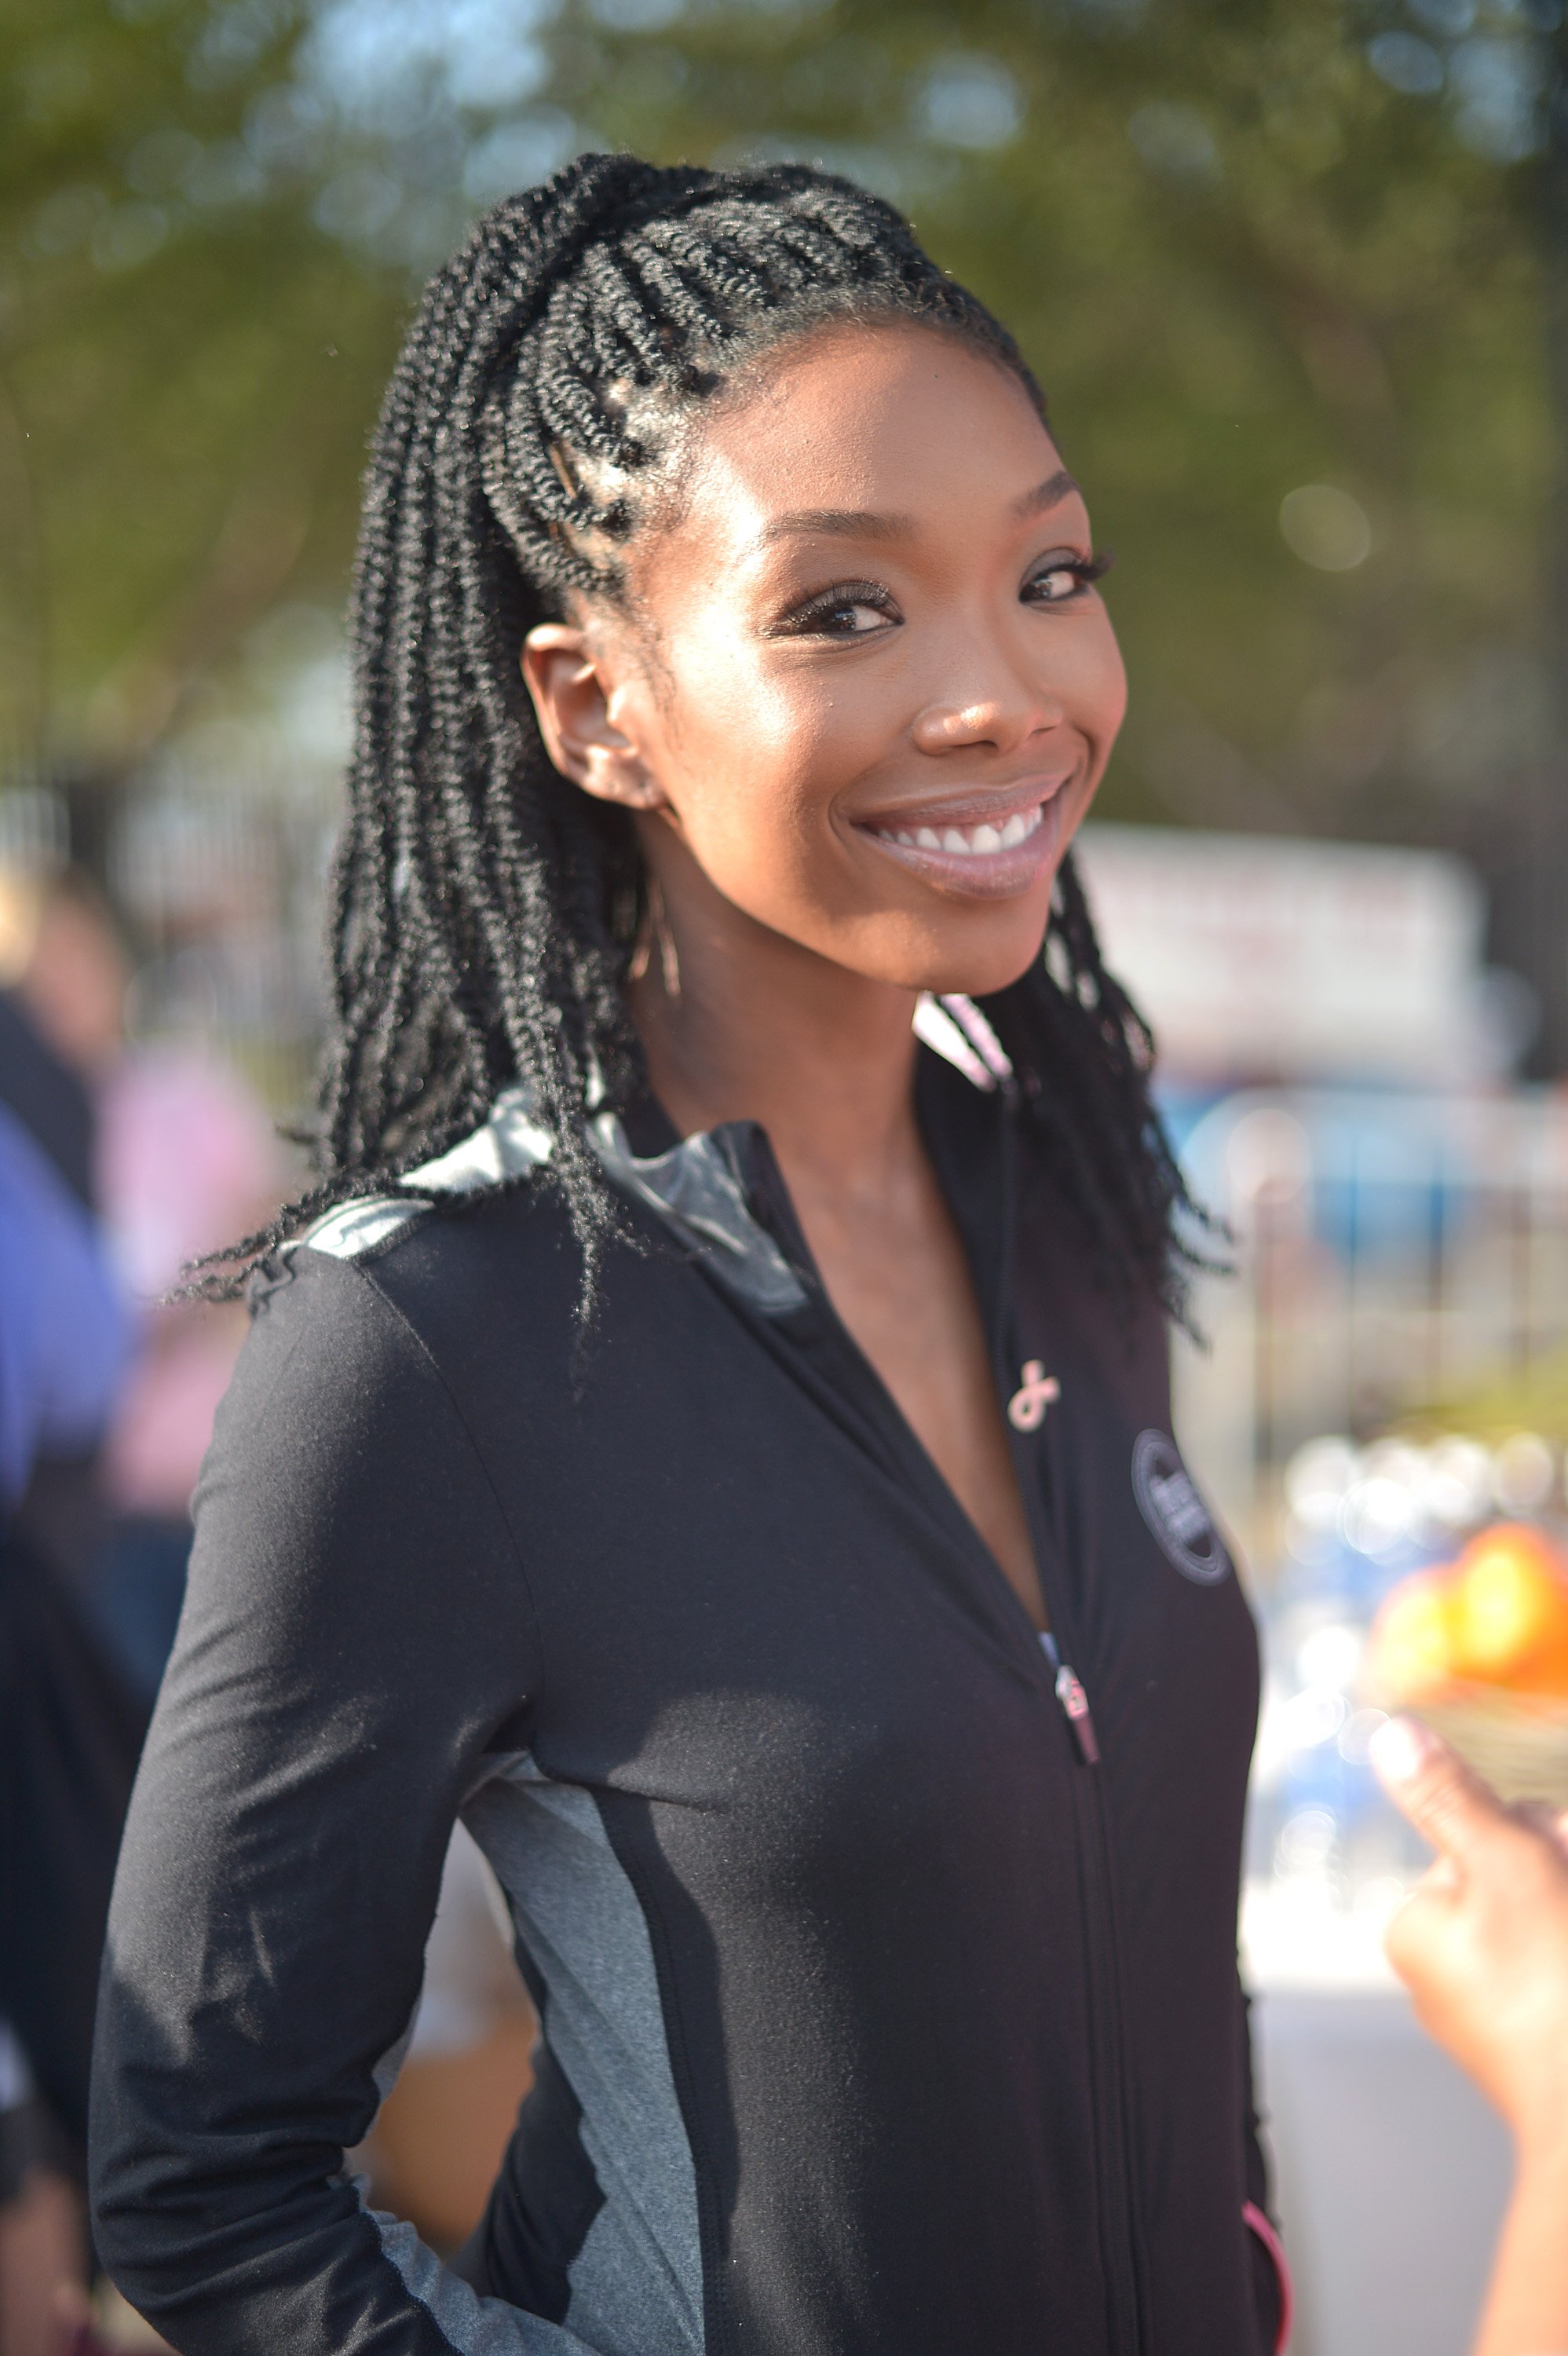 Brandy at the 21st Annual EIFRevlon Run Walk for Women in Los Angeles in May 2014. | Photo: Getty Images